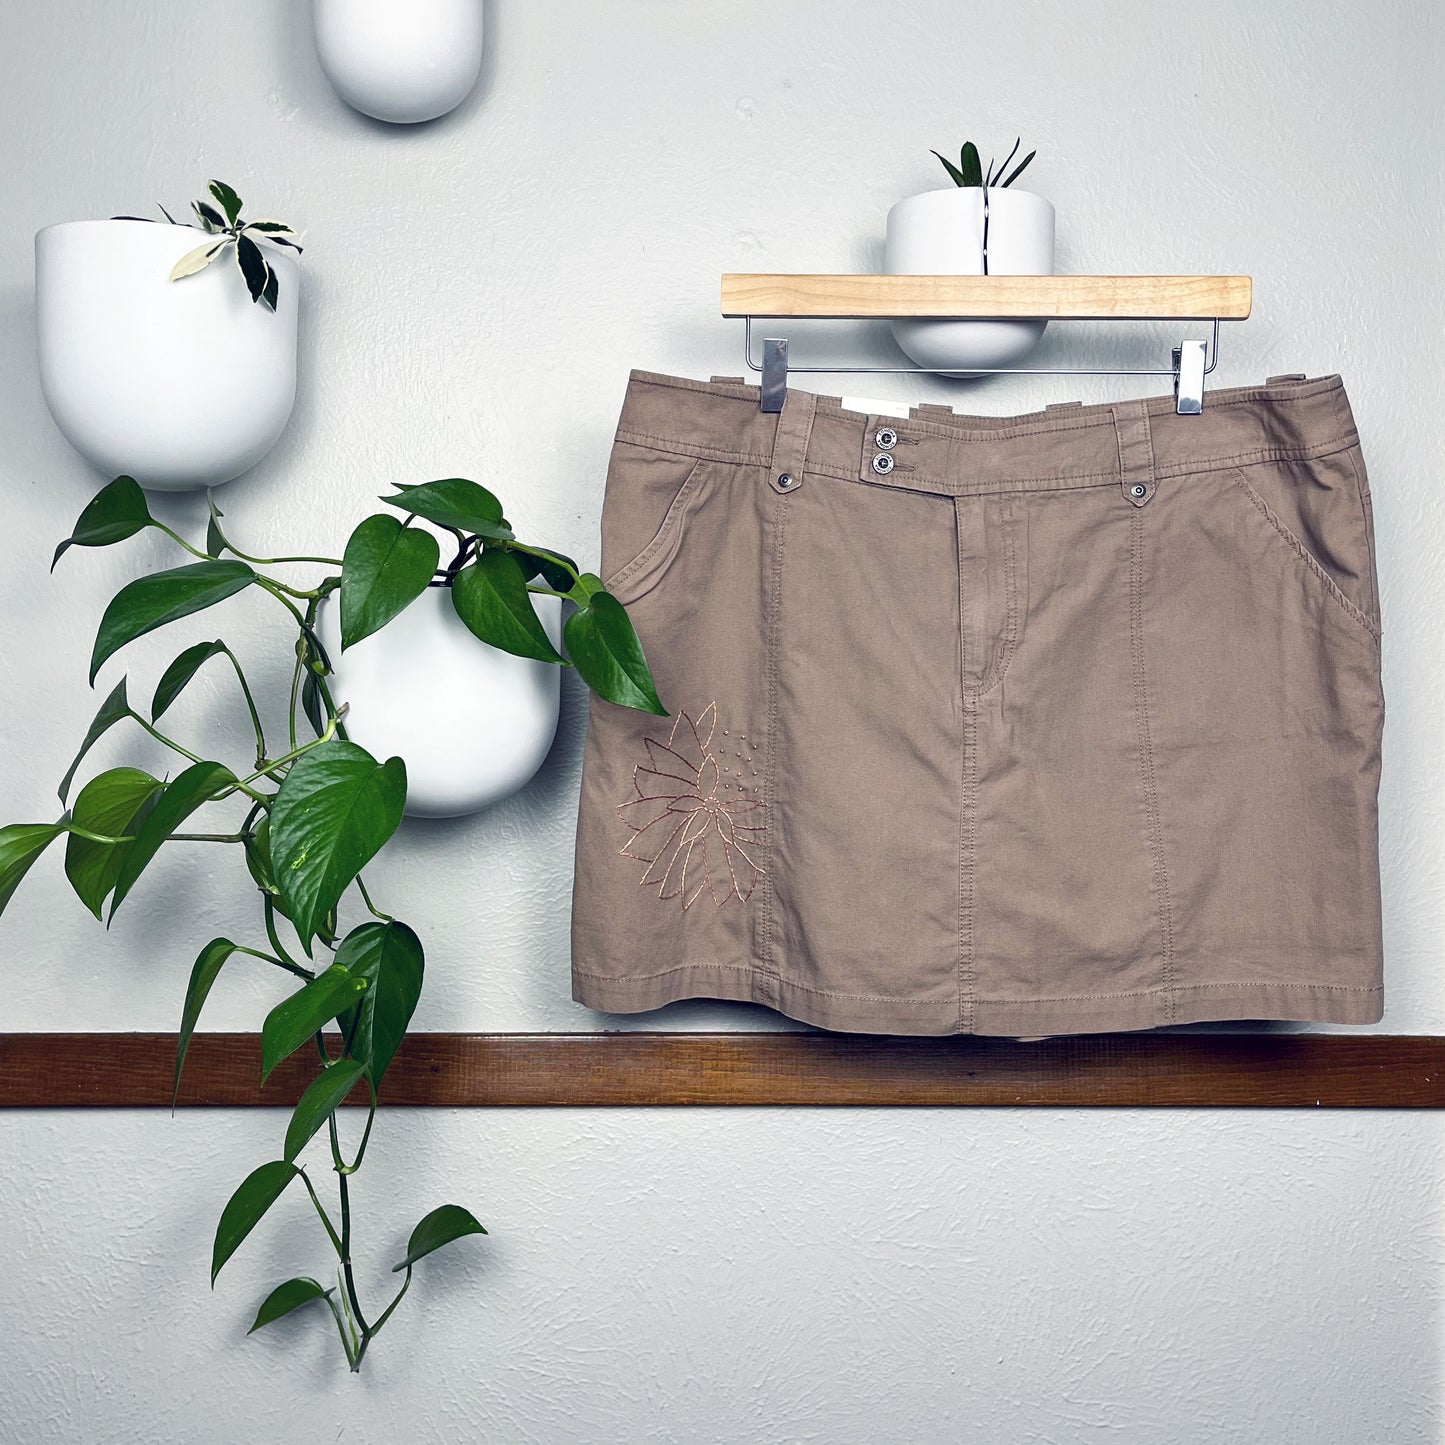 a mauve skirt on a hanger, the left side of the skirt has a hand embroidered dandelion in the same color as the skirt, hanging on a wall next to a pothos plant in a white round planter